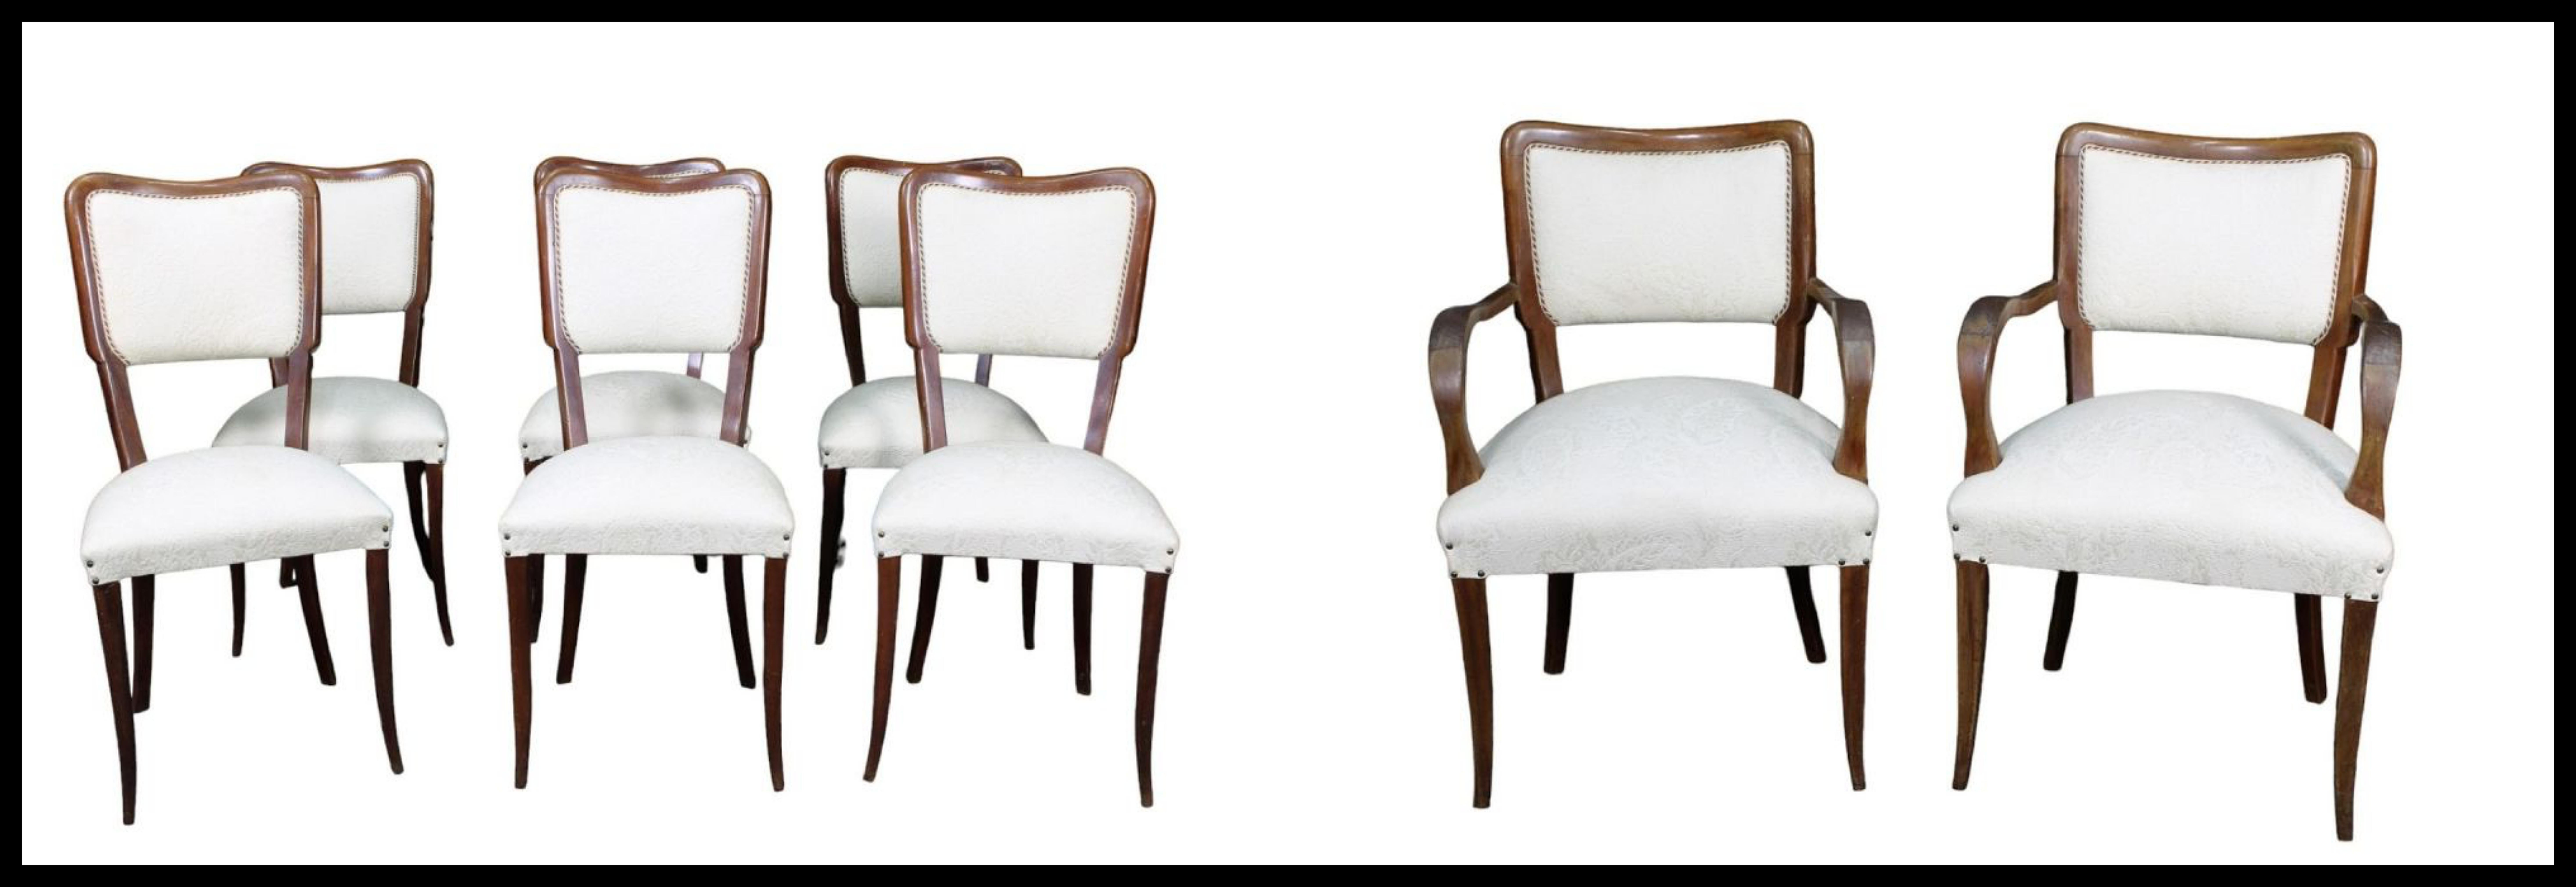 Hand-Crafted Six Chairs with a Pair of 20th Century Italian Armchairs For Sale